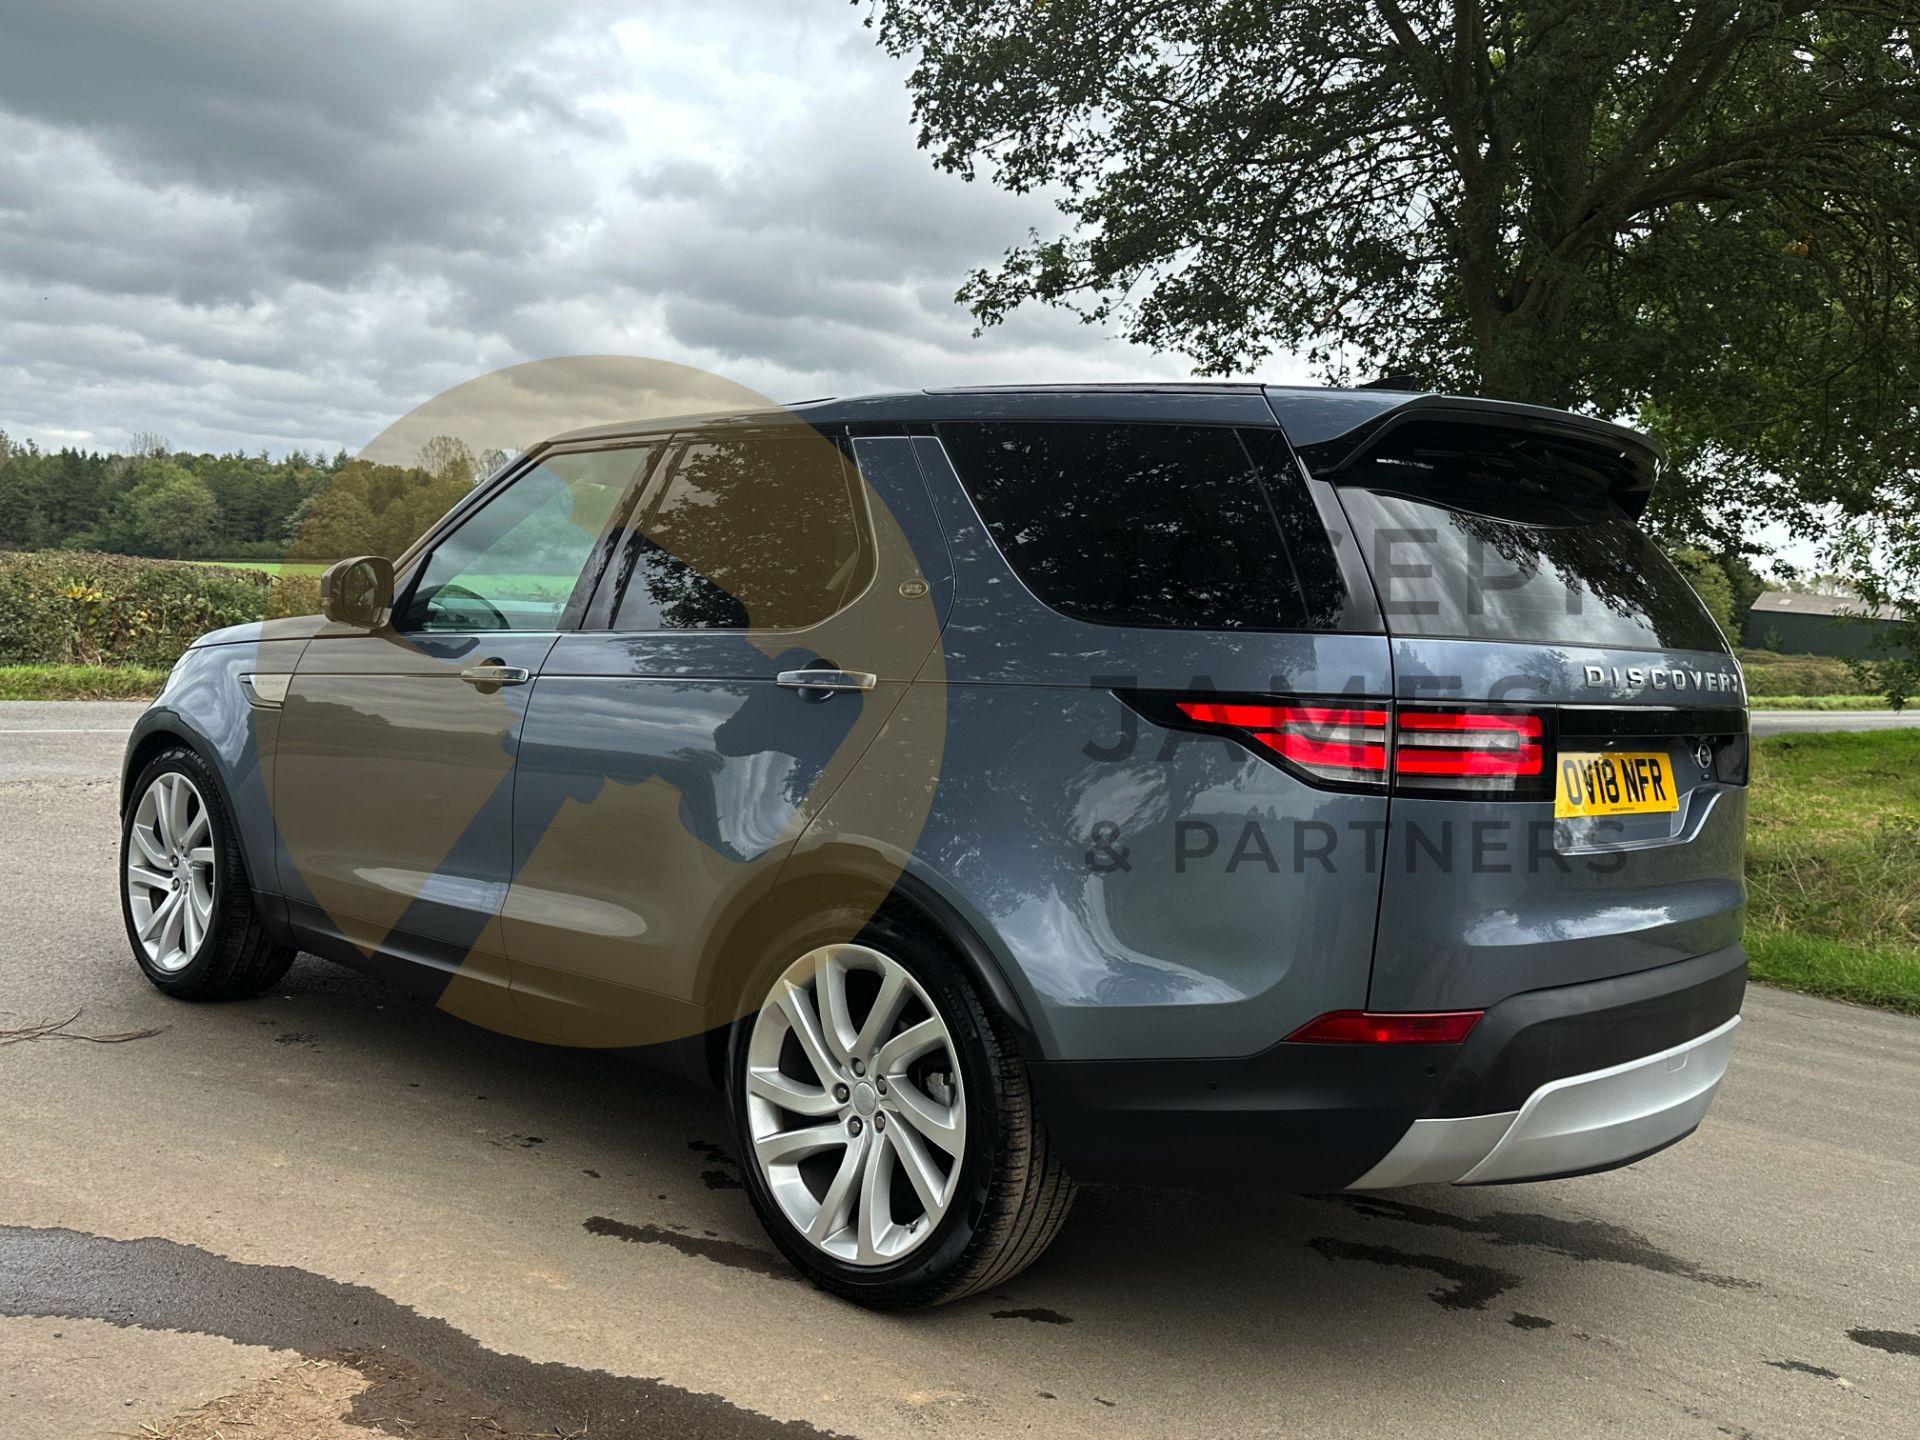 (ON SALE) LAND ROVER DISCOVERY 5 *HSE LUXURY* 7 SEATER SUV (2018 - FACELIFT MODEL) (LOW MILEAGE) - Image 10 of 66